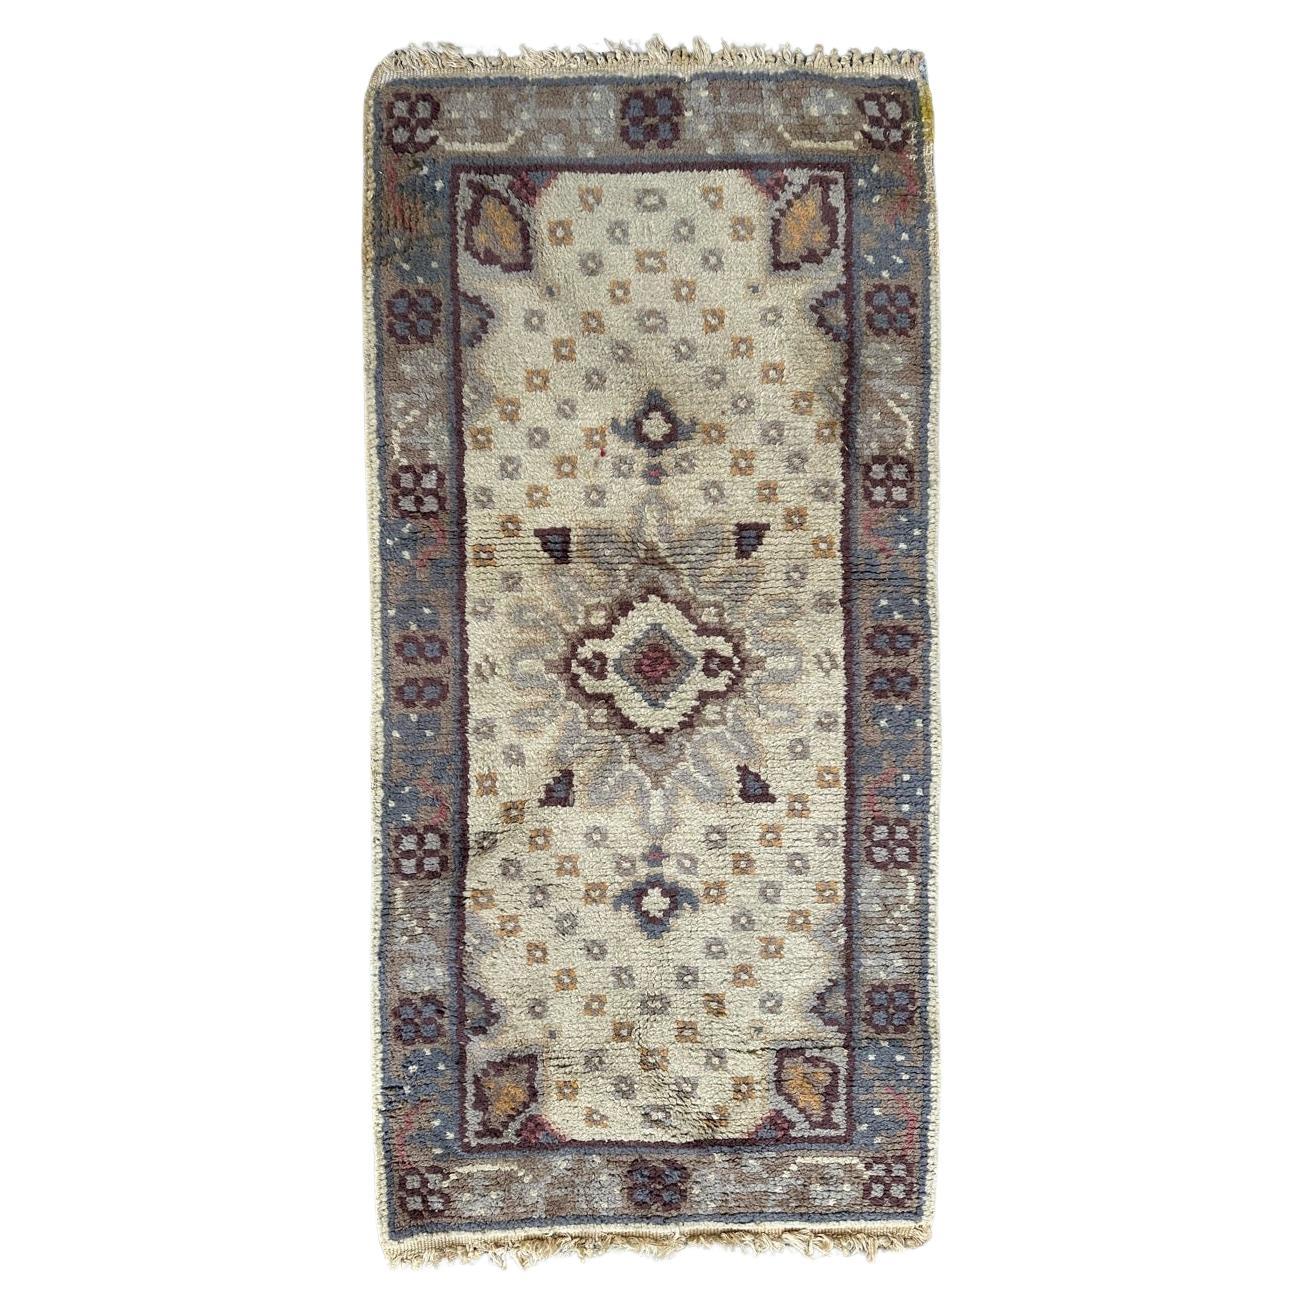 Bobyrug’s Beautiful early 20th century European rug For Sale